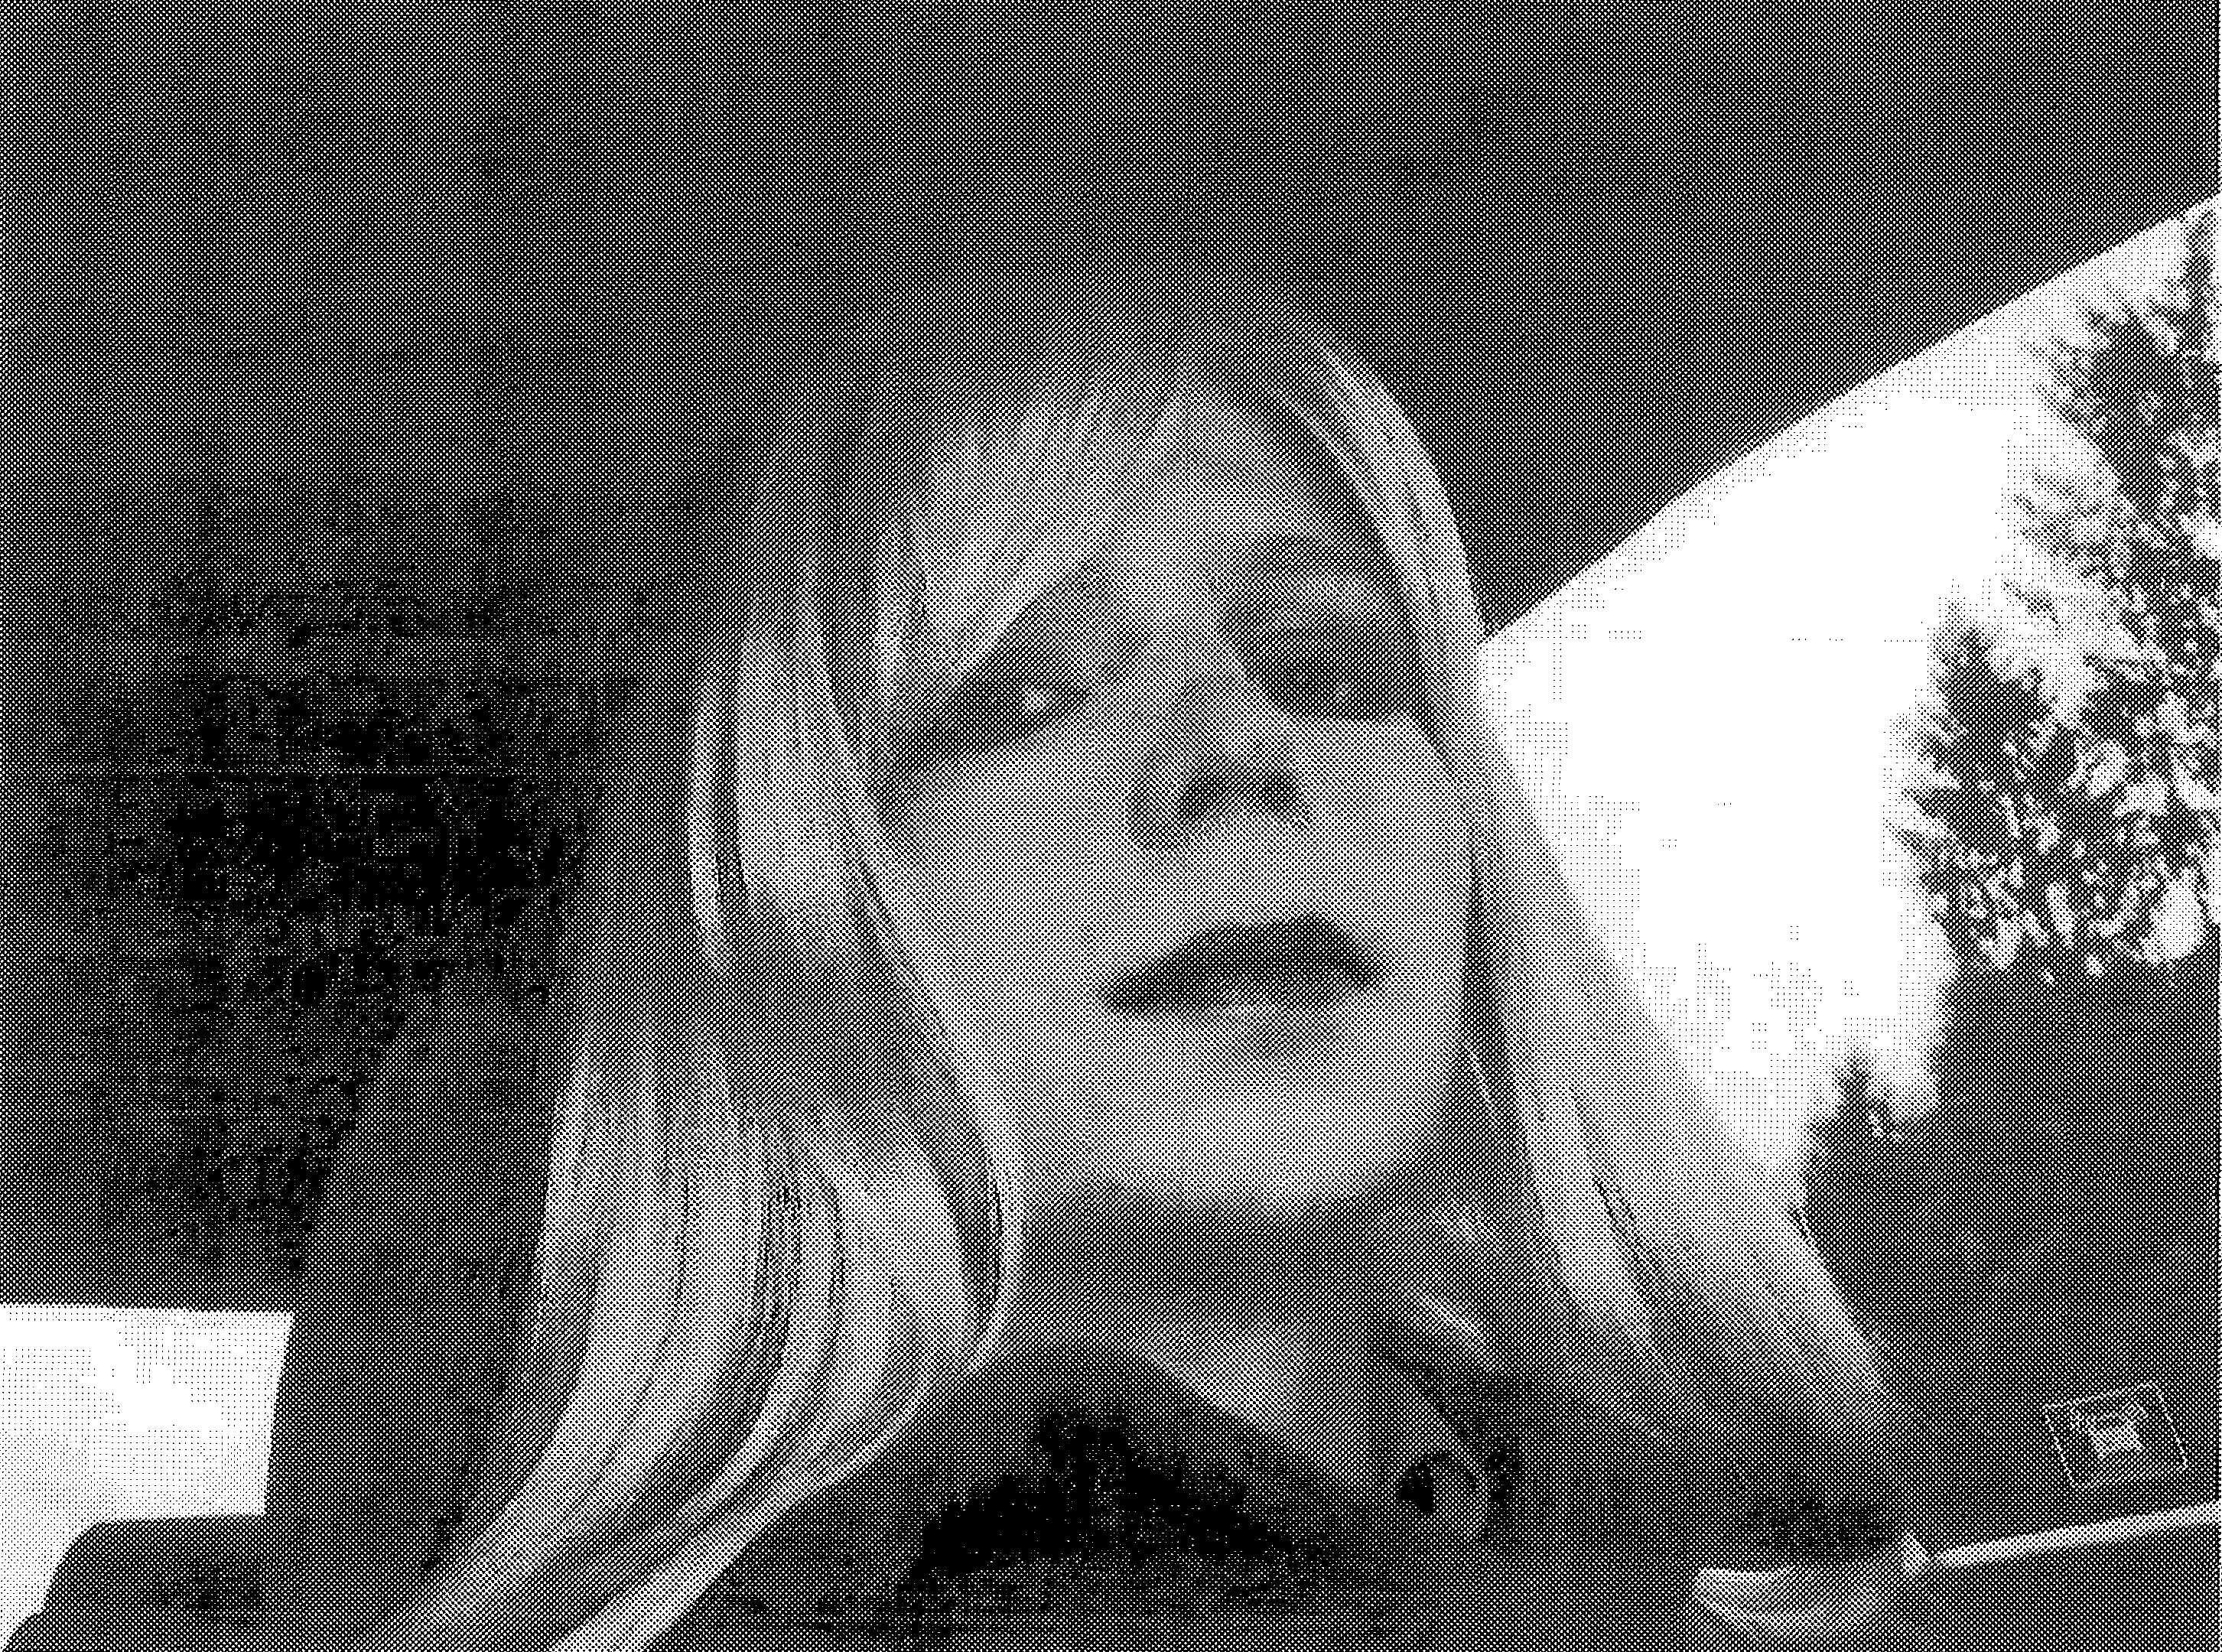 Chelsea Manning is pictured dressed as a woman in this 2010 photograph obtained on August 14, 2013 (Reuters)